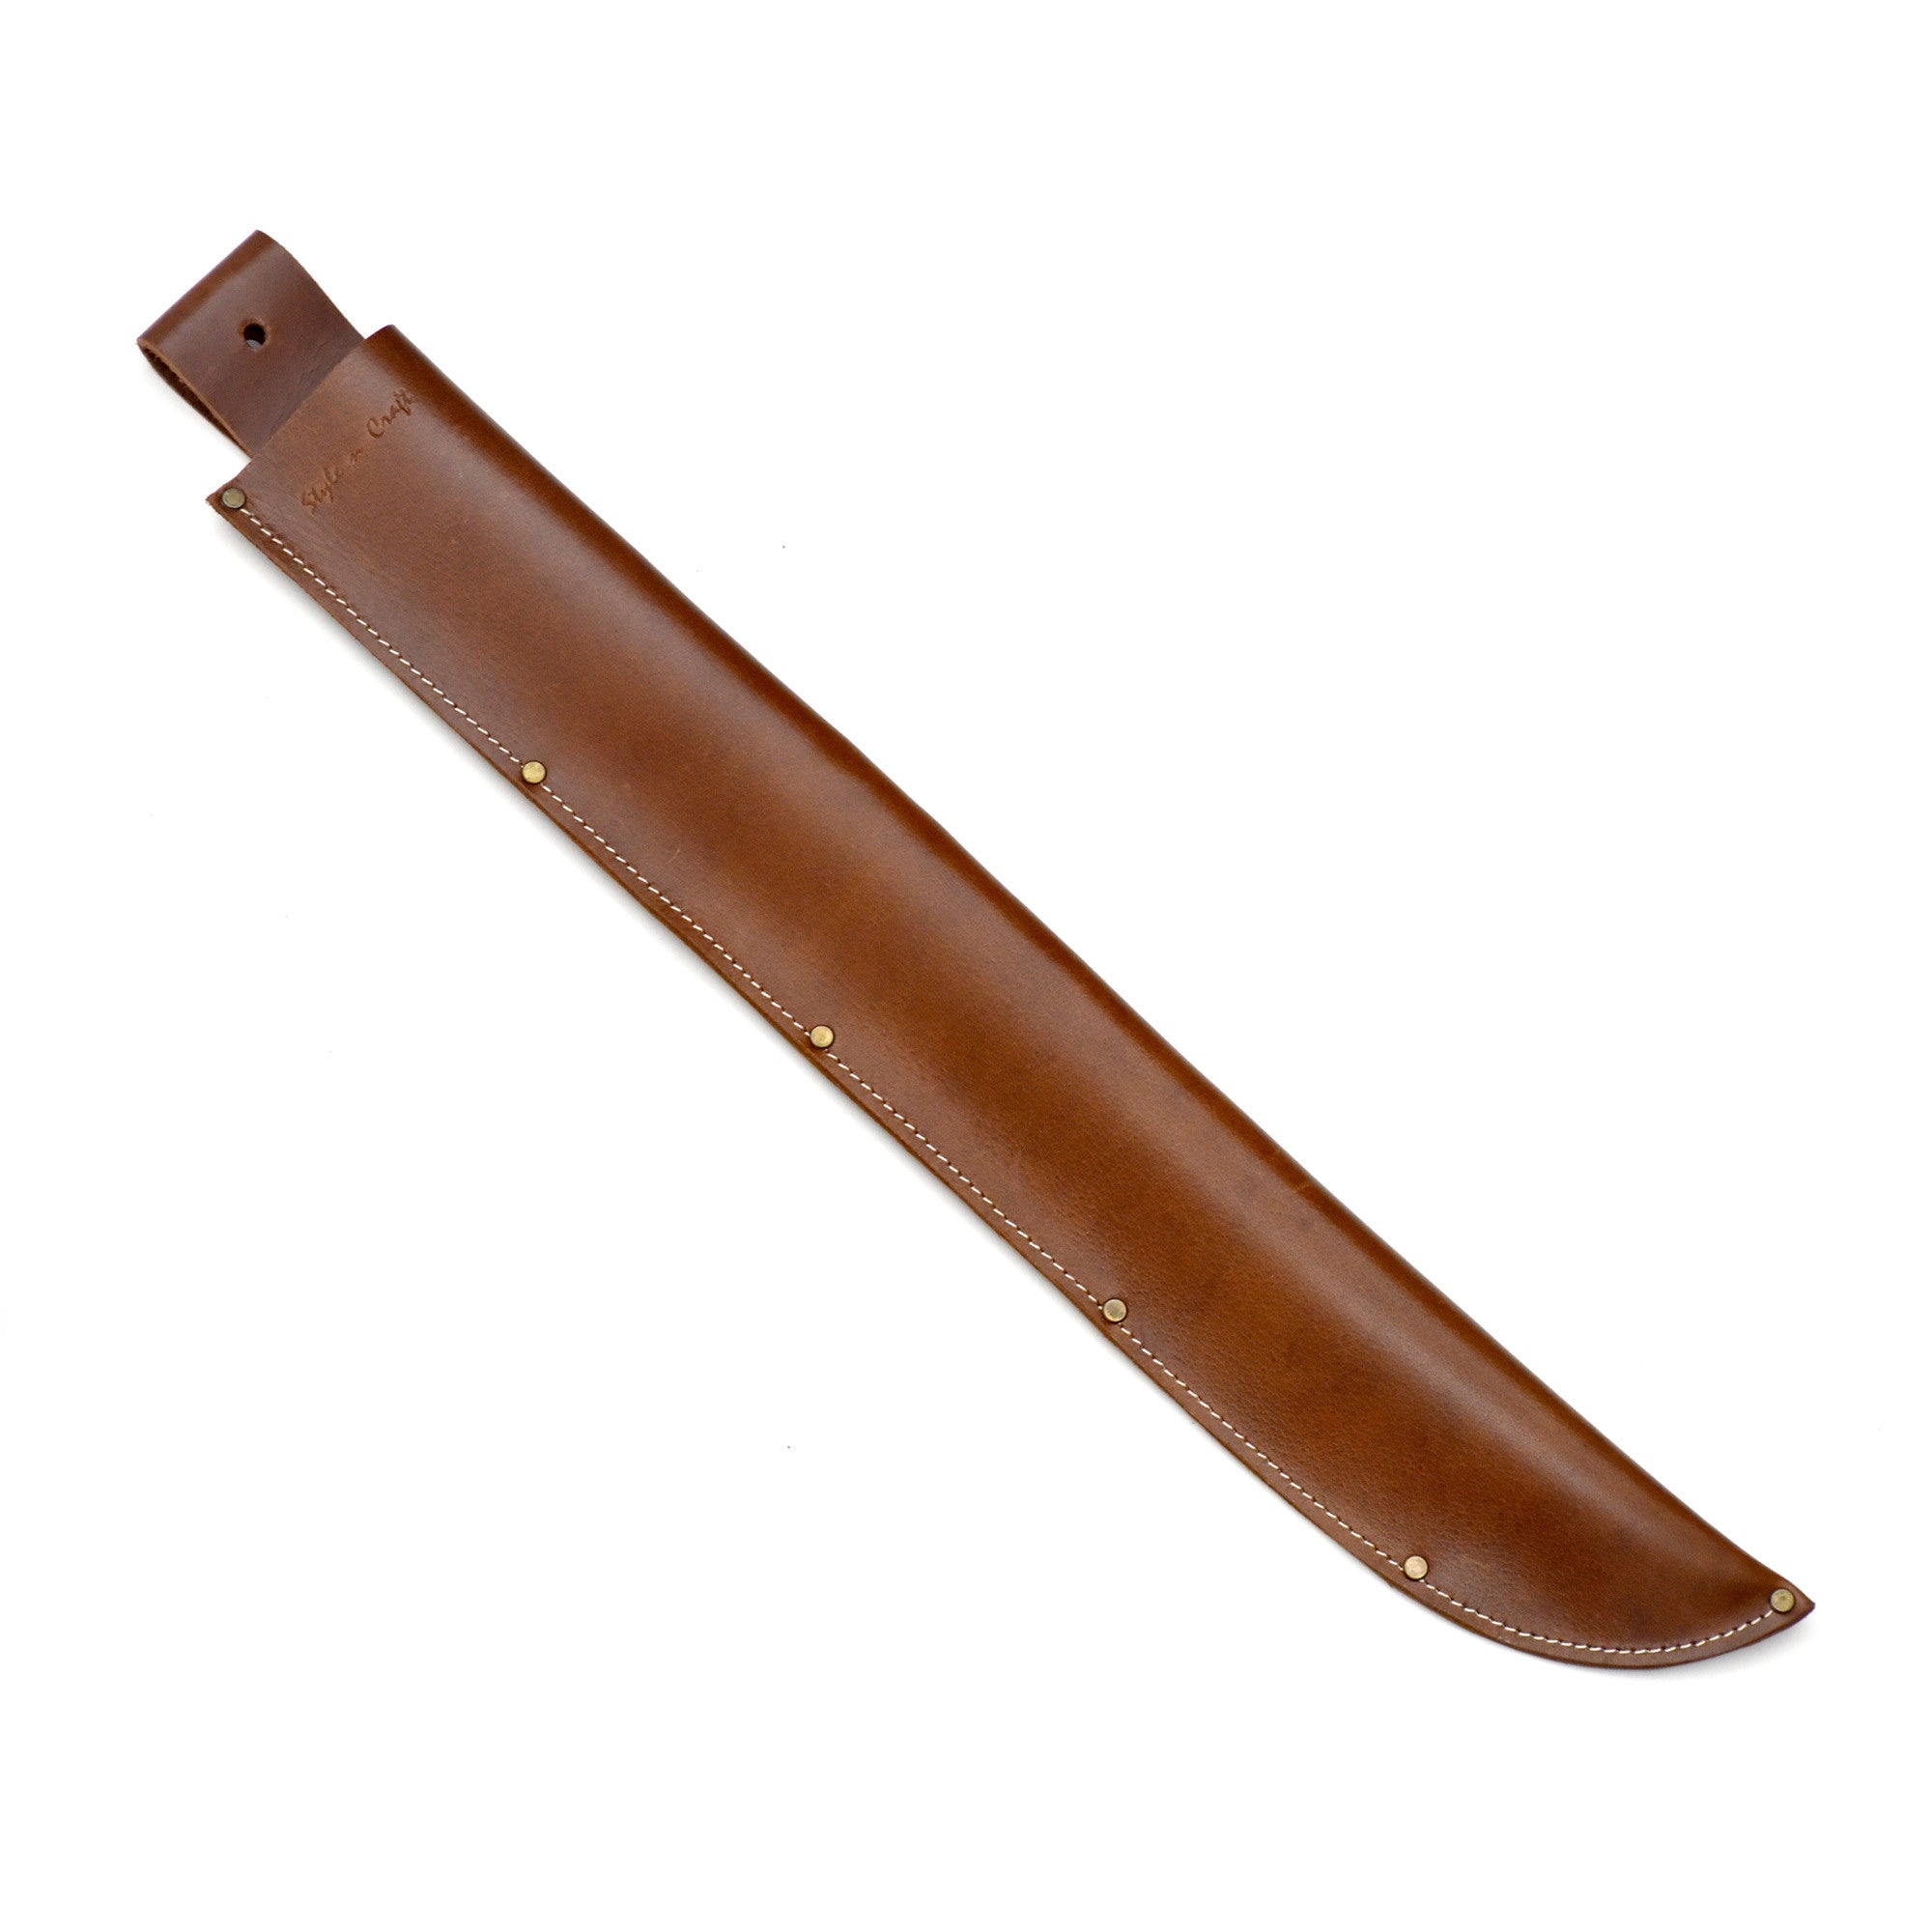 SMALL Machete Sheath Handmade for Machetes and Large Knives heavy THICK  Leather up to 13 Inch -  Australia